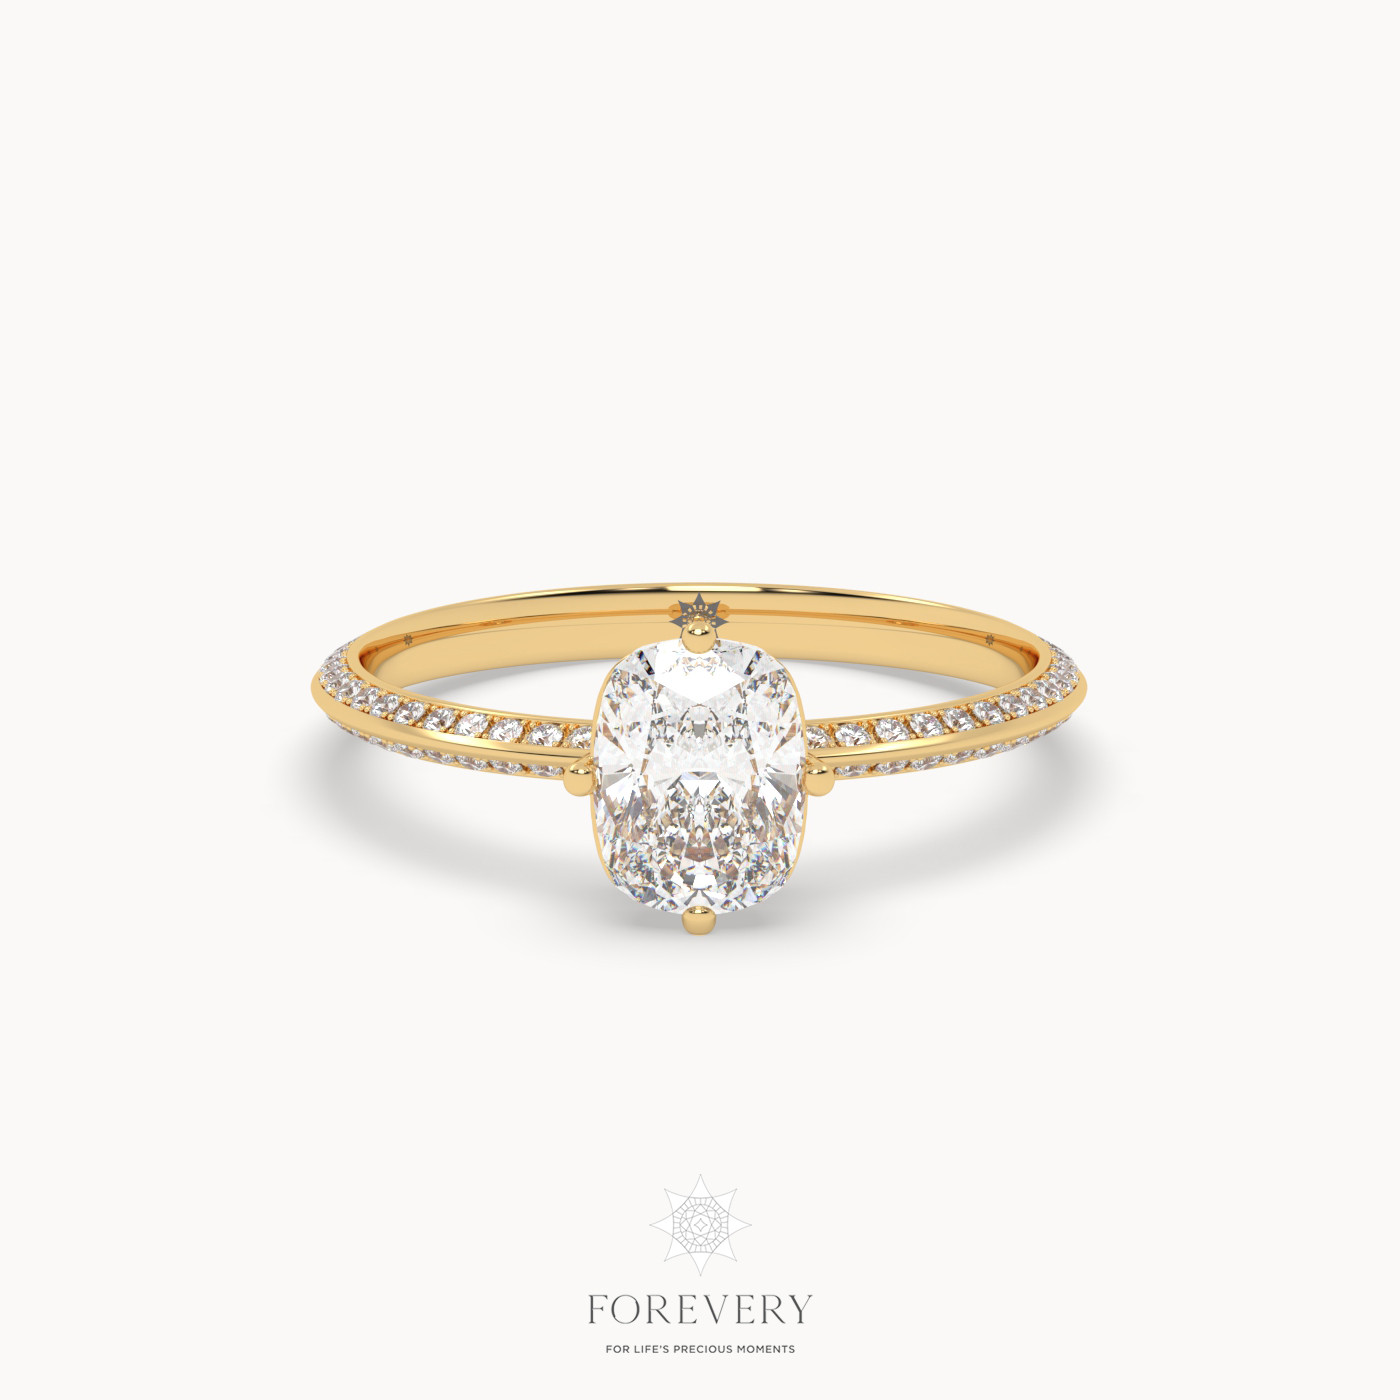 18k rose gold  cushion cut diamond engagement ring with pave band Photos & images